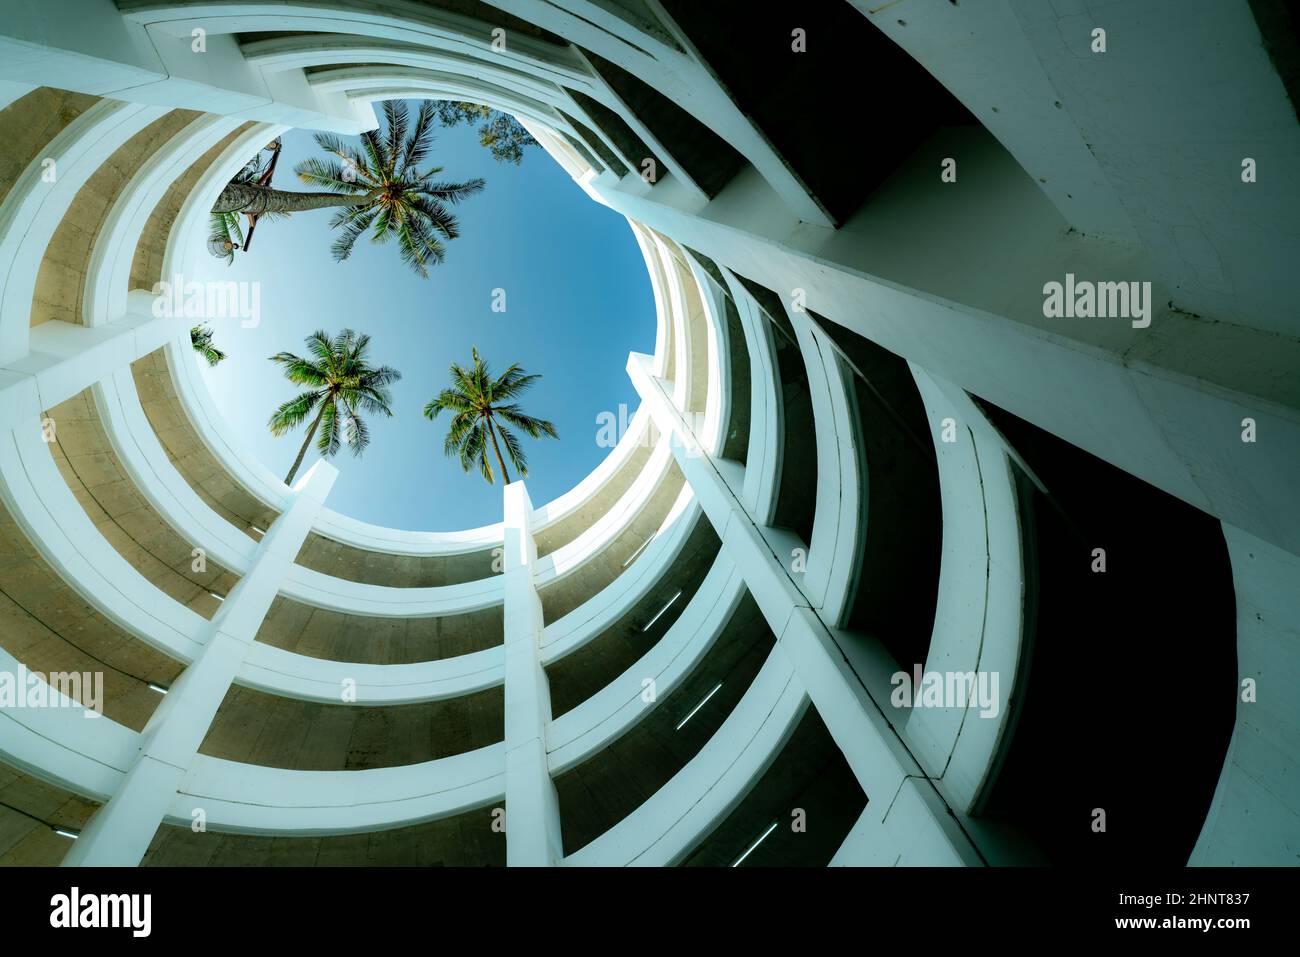 Bottom view multi-story car park building with coconut tree above building in summer. Multi-level parking garage. Indoor car parking lot. Architecture of spiral curve building. Sustainable building. Stock Photo